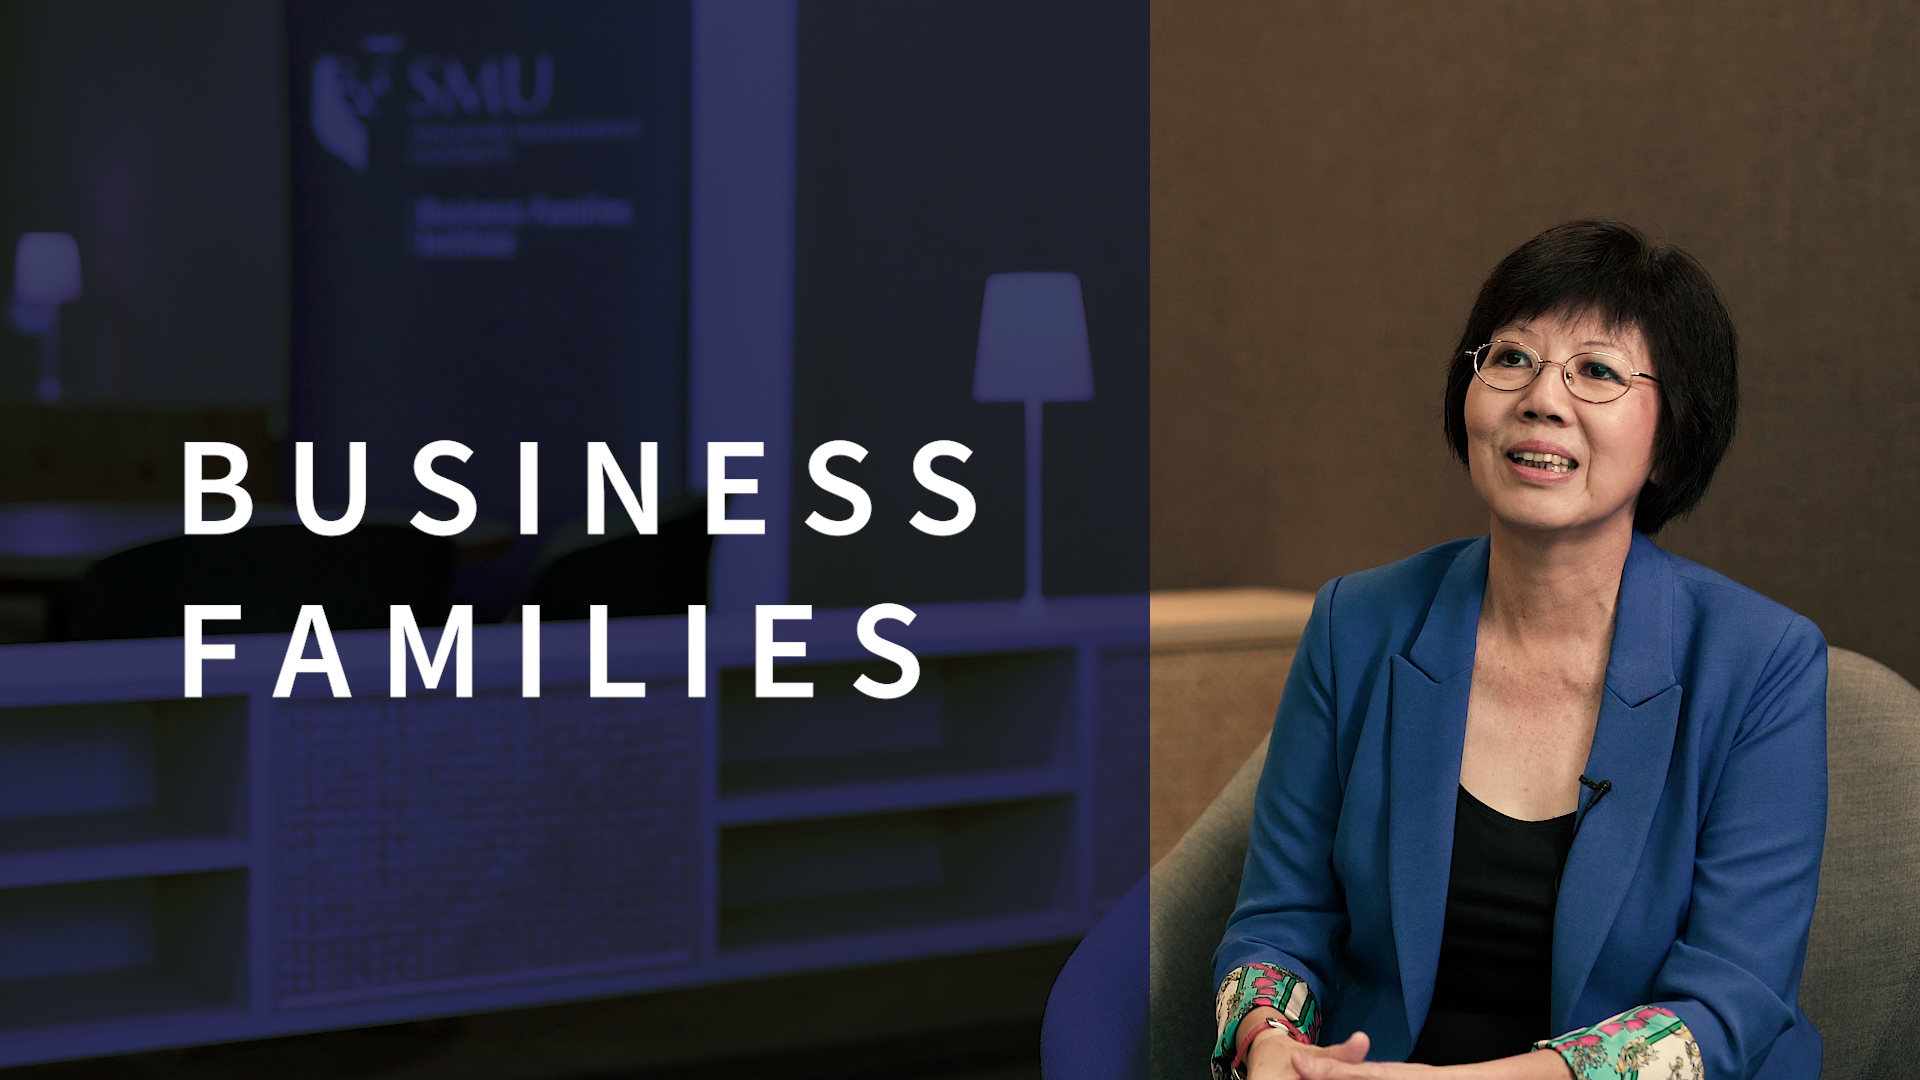 Image of Prof Annie Koh, with title of the video: Business Families